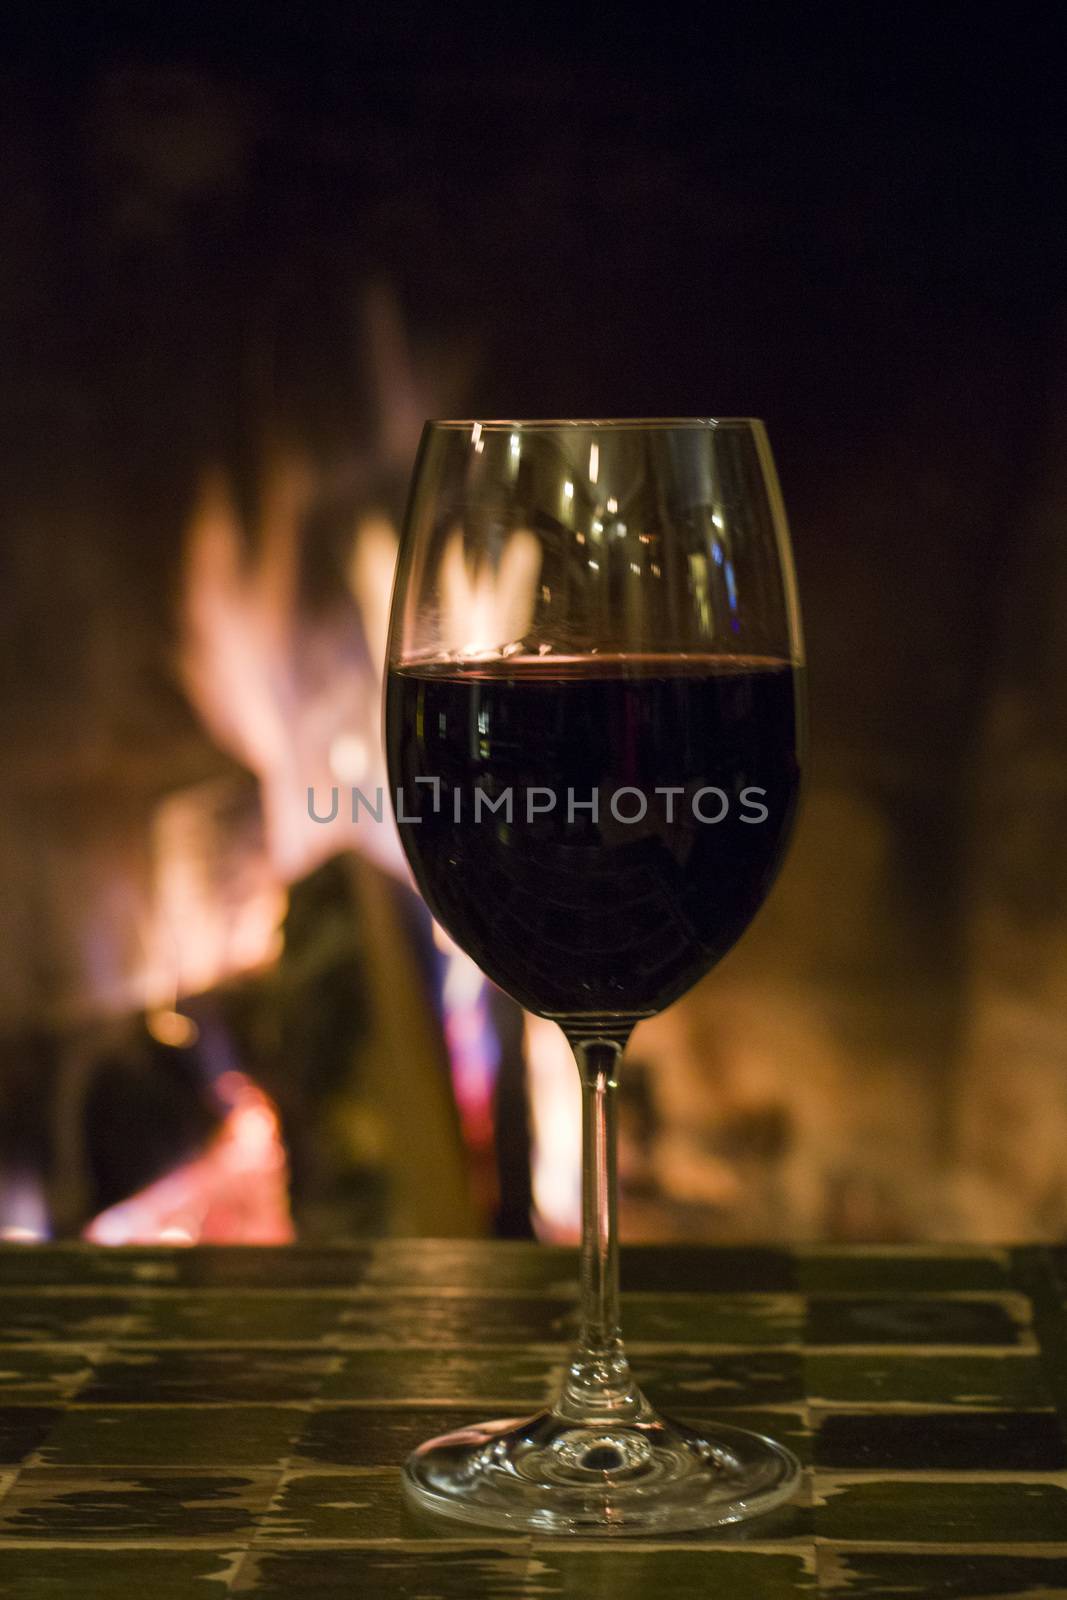 Full wine glass on the table and fireplace background by Taidundua